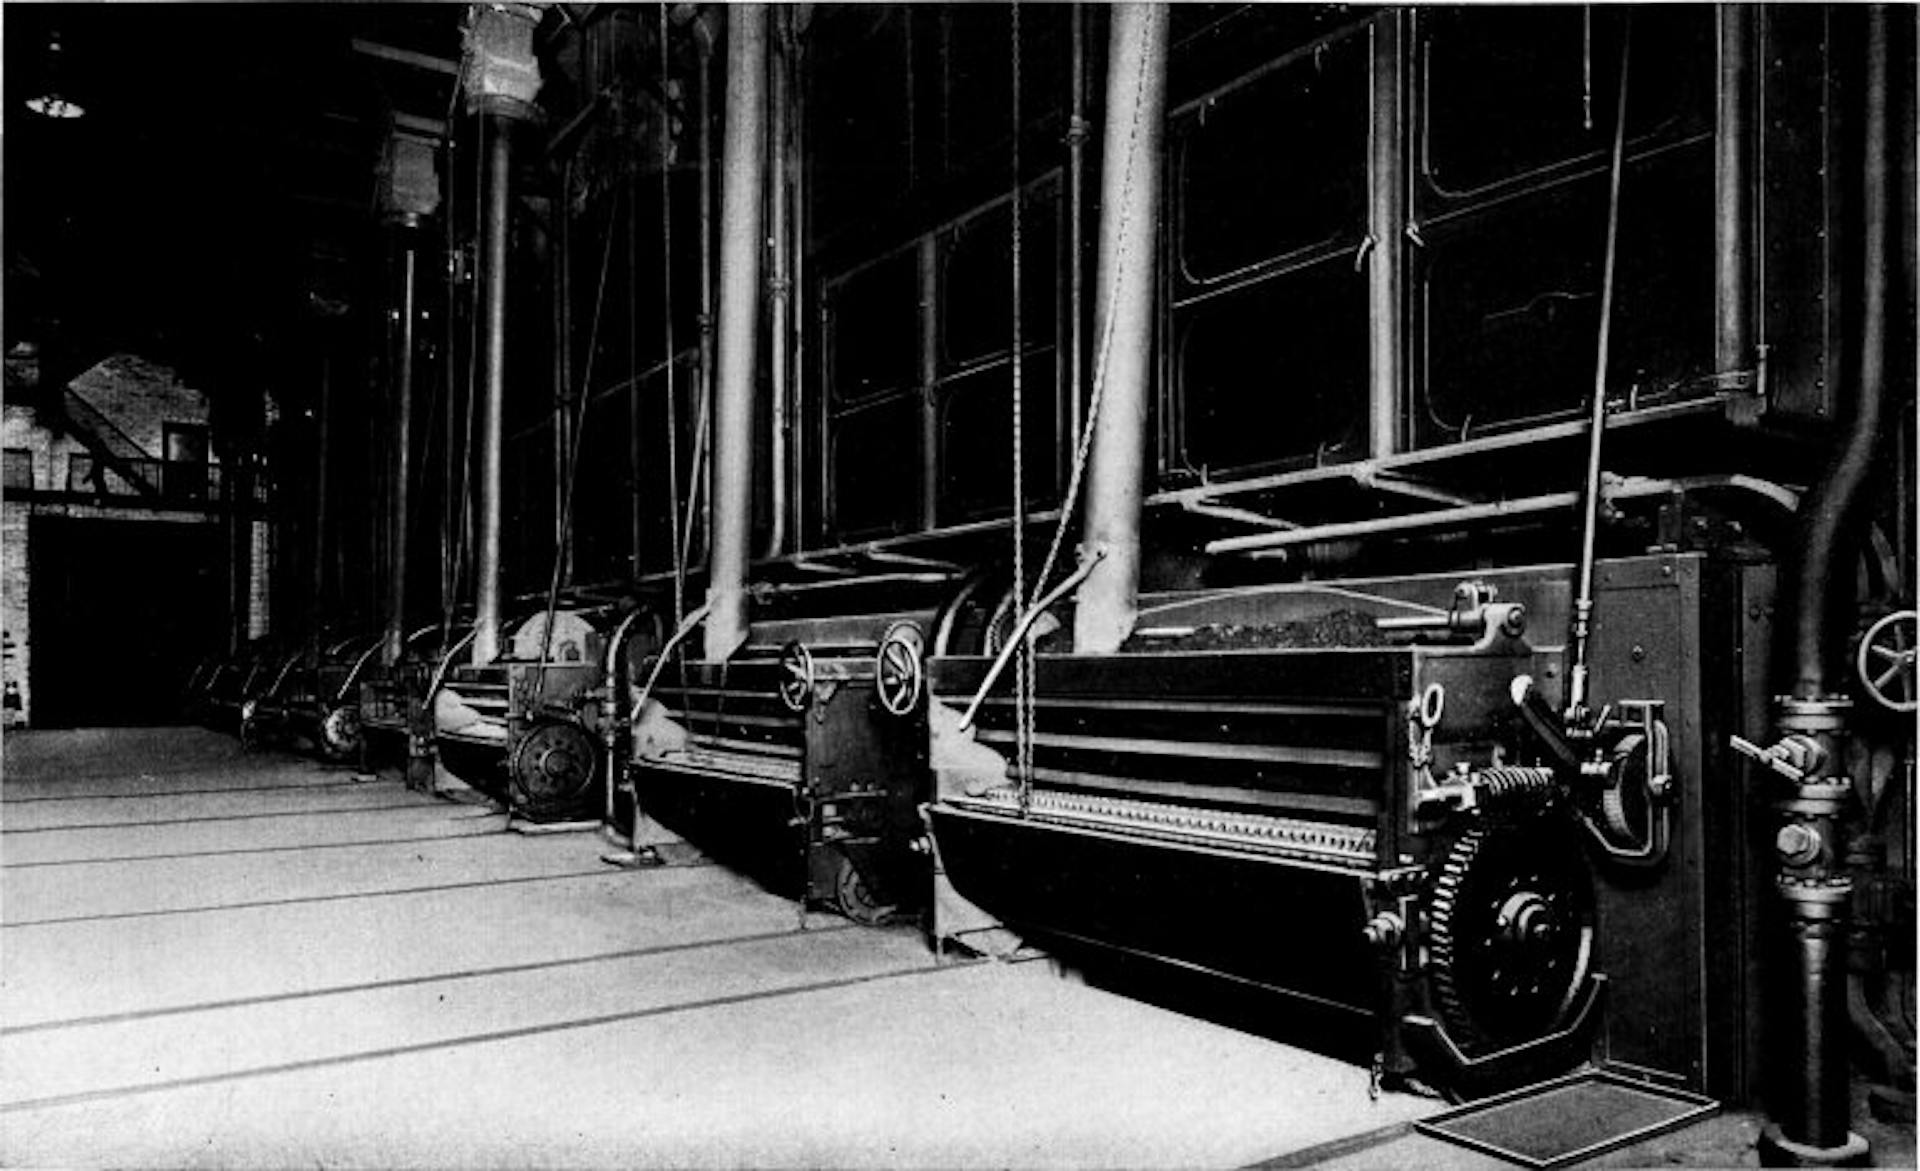 4064 HORSE-POWER Installation of Babcock & Wilcox Boilers and Superheaters, Equipped with Babcock & Wilcox Chain Grate Stokers, at the Cosmopolitan Electric Co., Chicago, Ill.